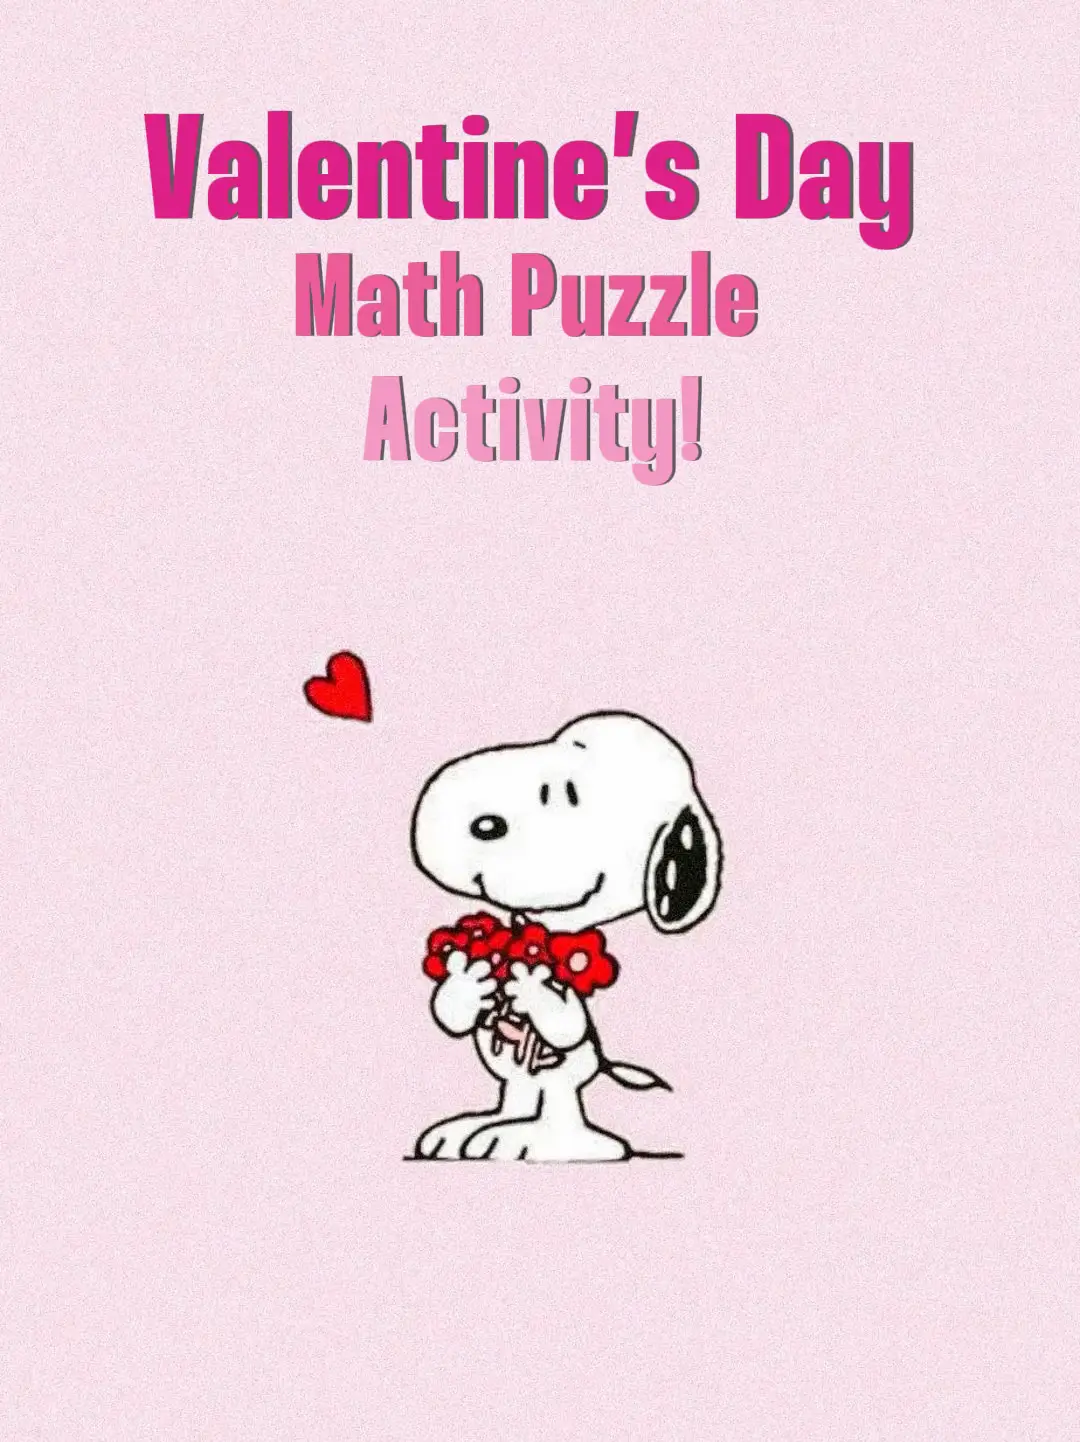 Valentine’s Day Math Puzzle Activity 's images